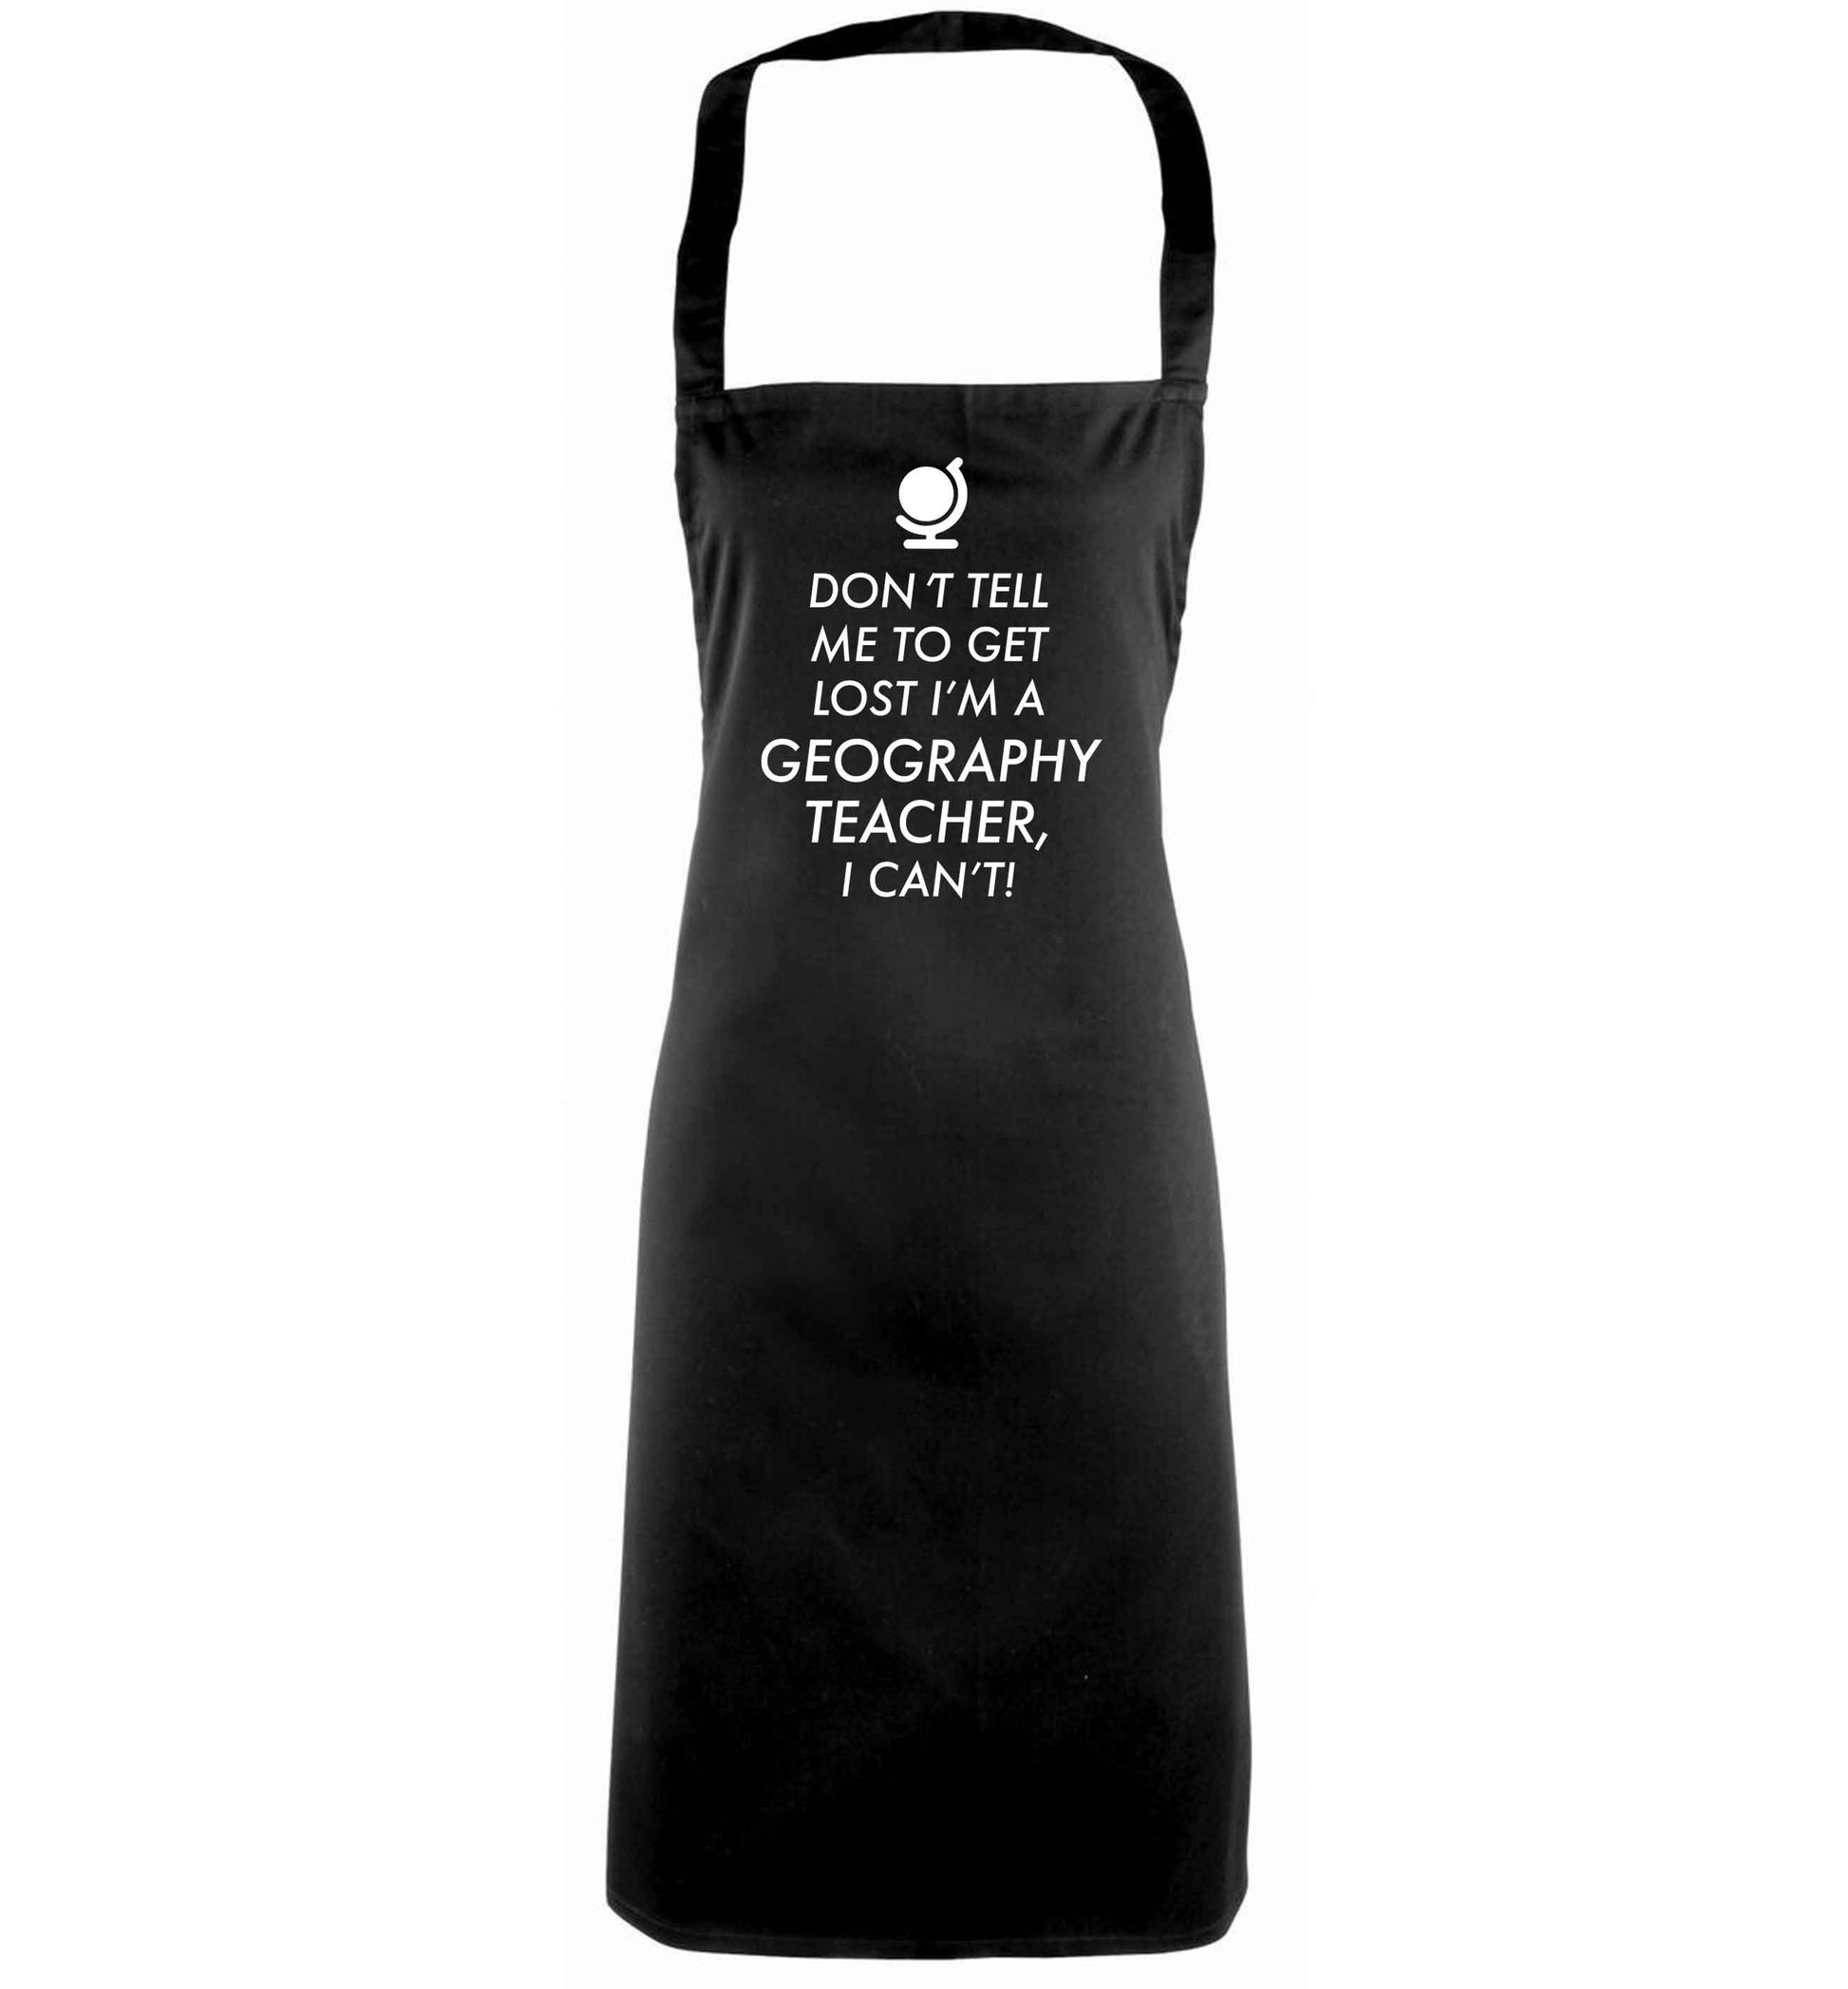 Don't tell me to get lost I'm a geography teacher, I can't black apron